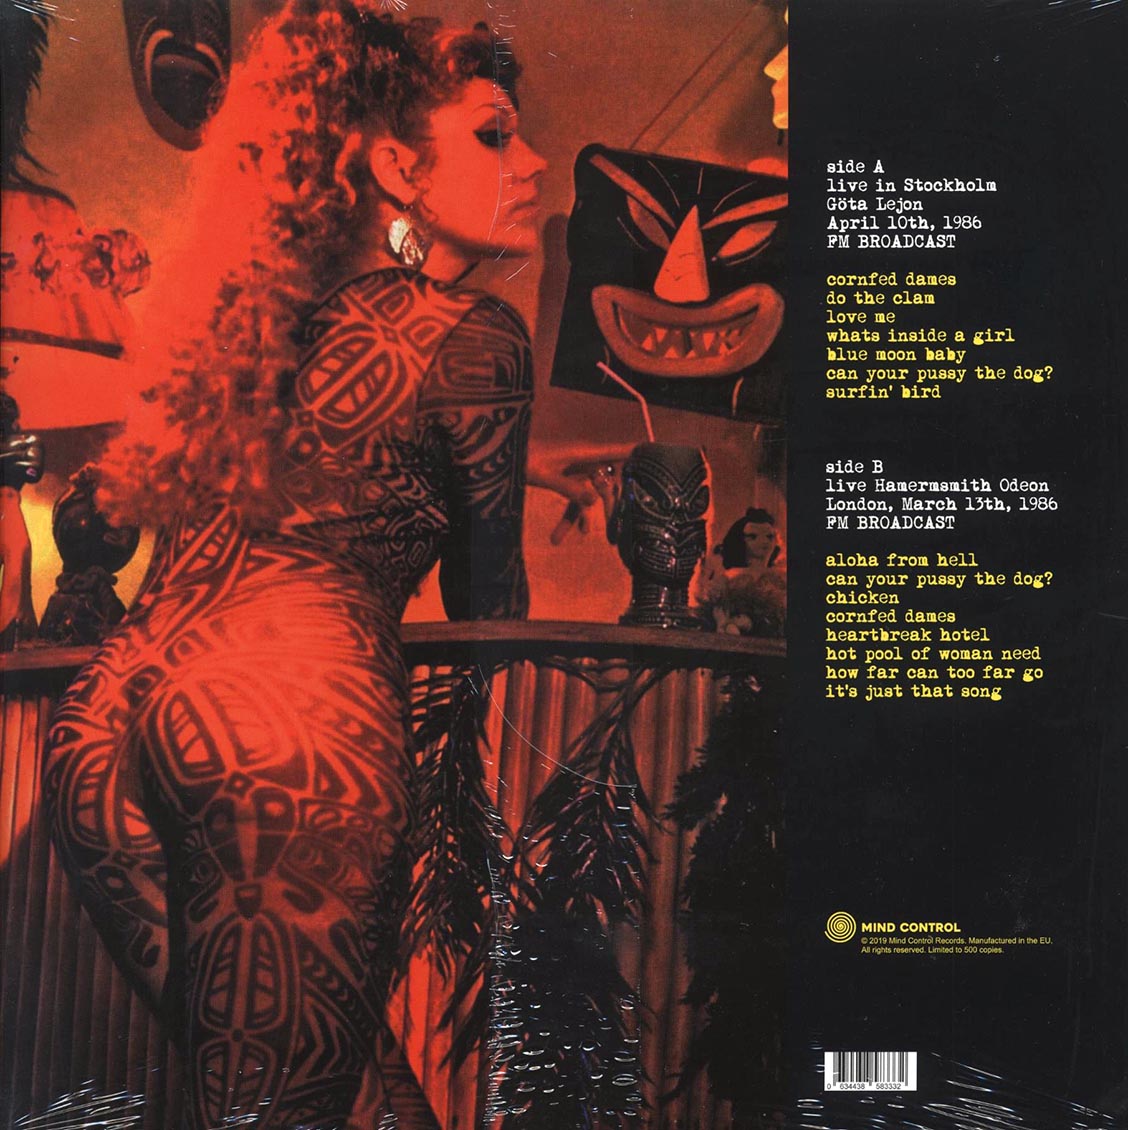 The Cramps - Performing Songs Of Sex, Love And Hate: Broadcast From London And Stockholm, A Date With Elvis Tour, 1986 (ltd. 500 copies made) - Vinyl LP, LP